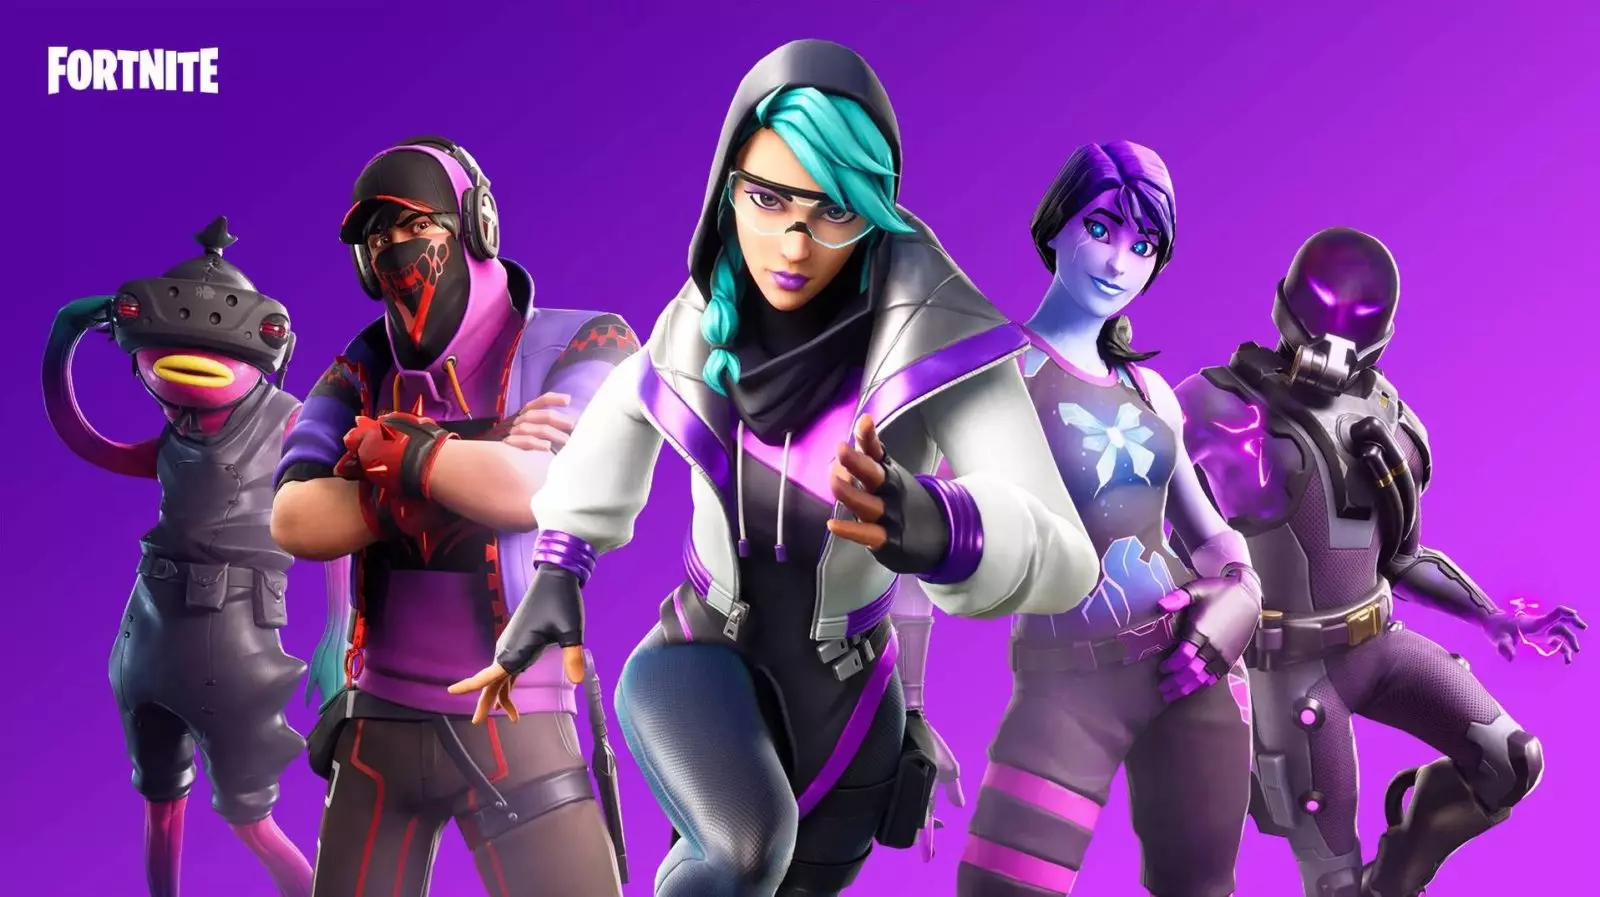 Watch the Fortnite Champion Series Season X Finals live Friday, September 20 at 1 PM ET!